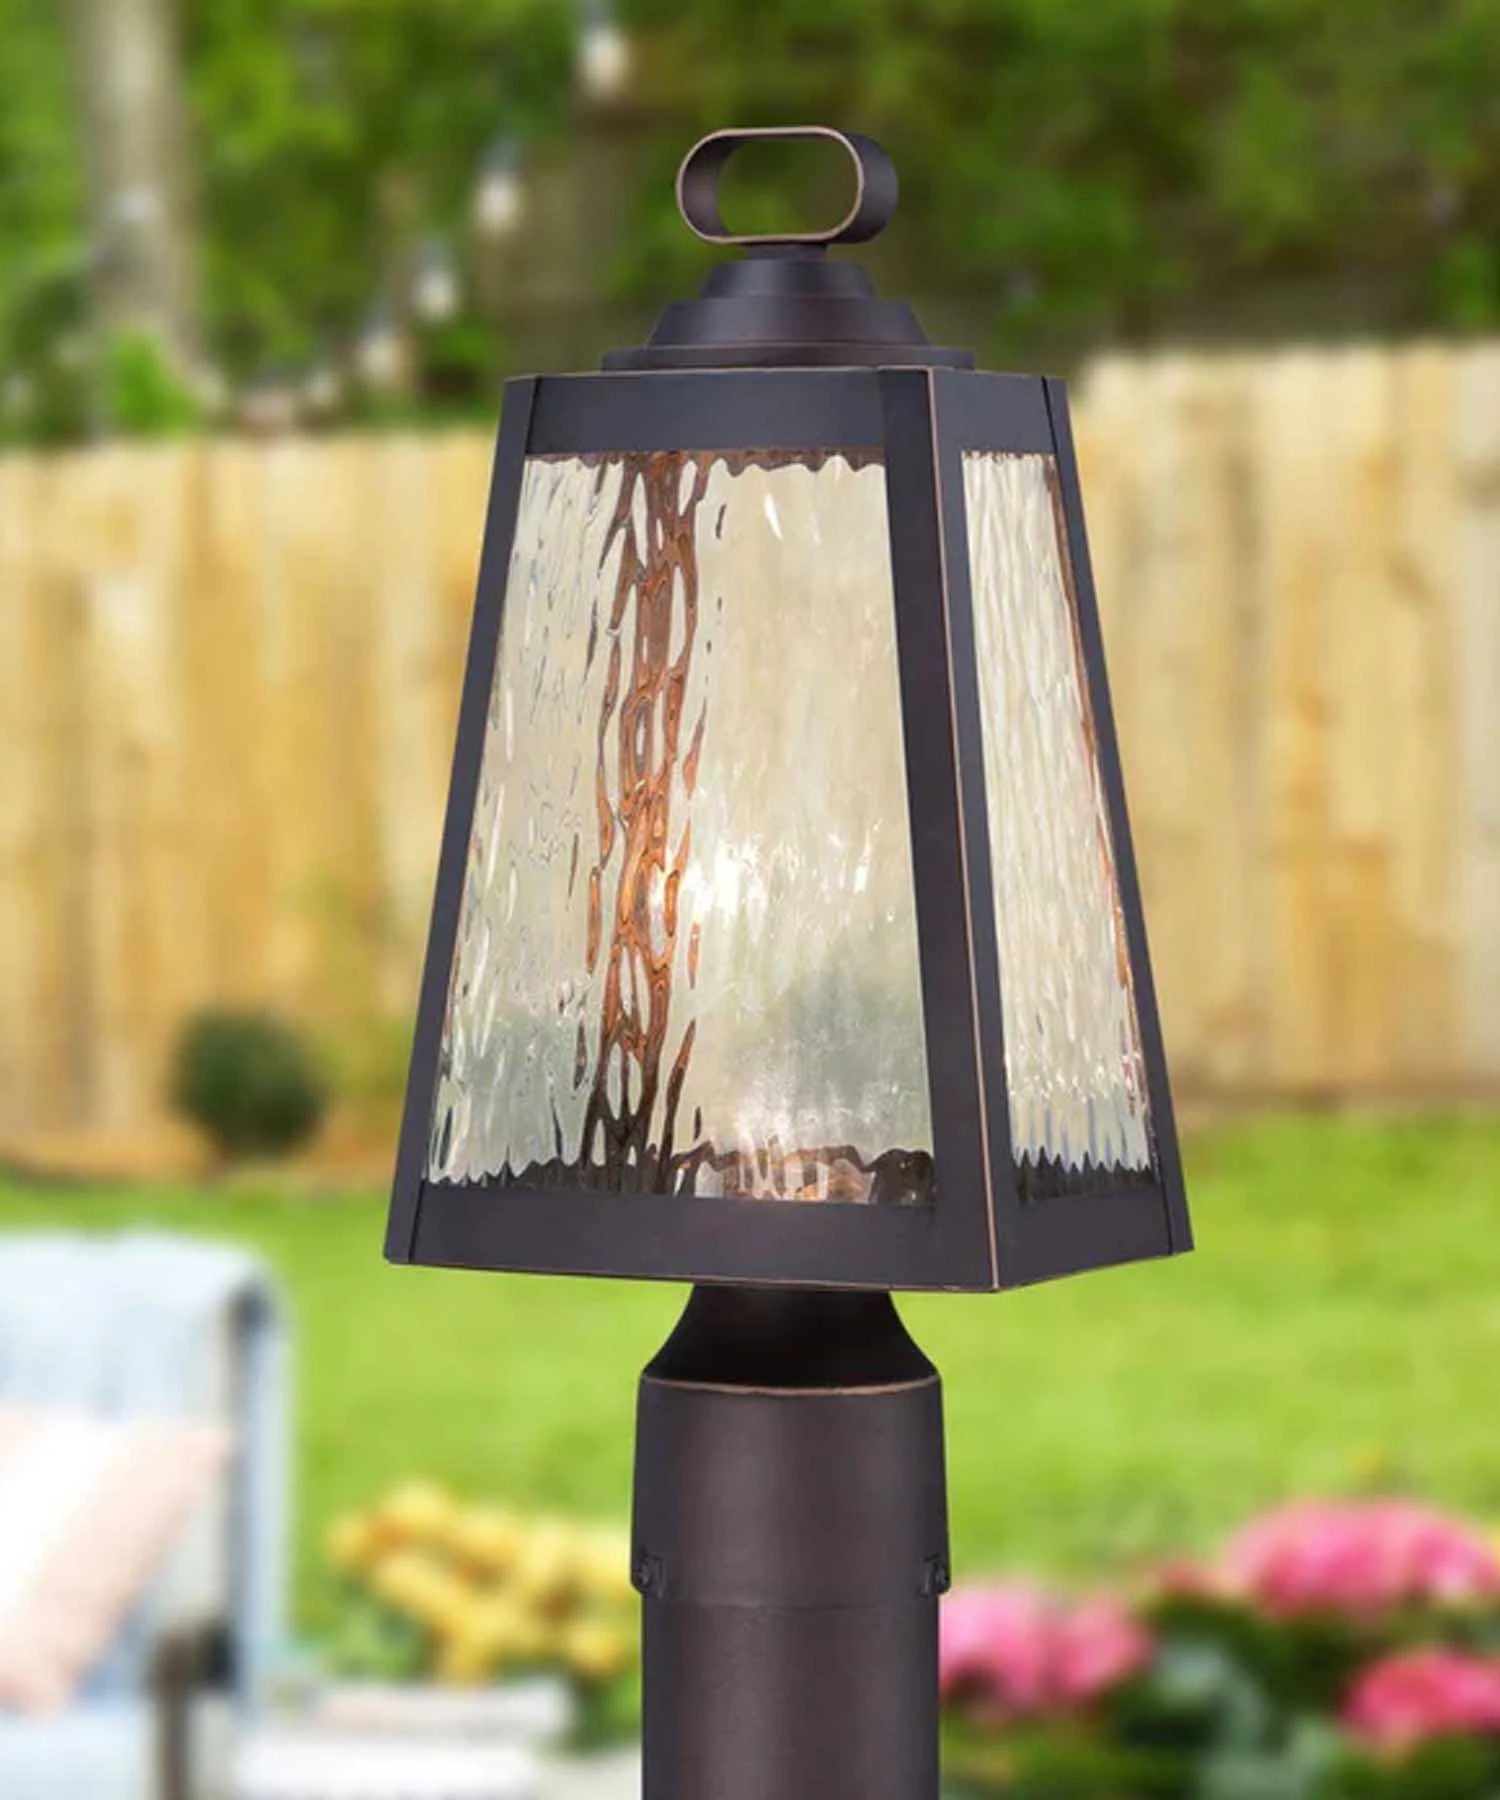 The Great Outdoors Lamp Posts - Bees Lighting